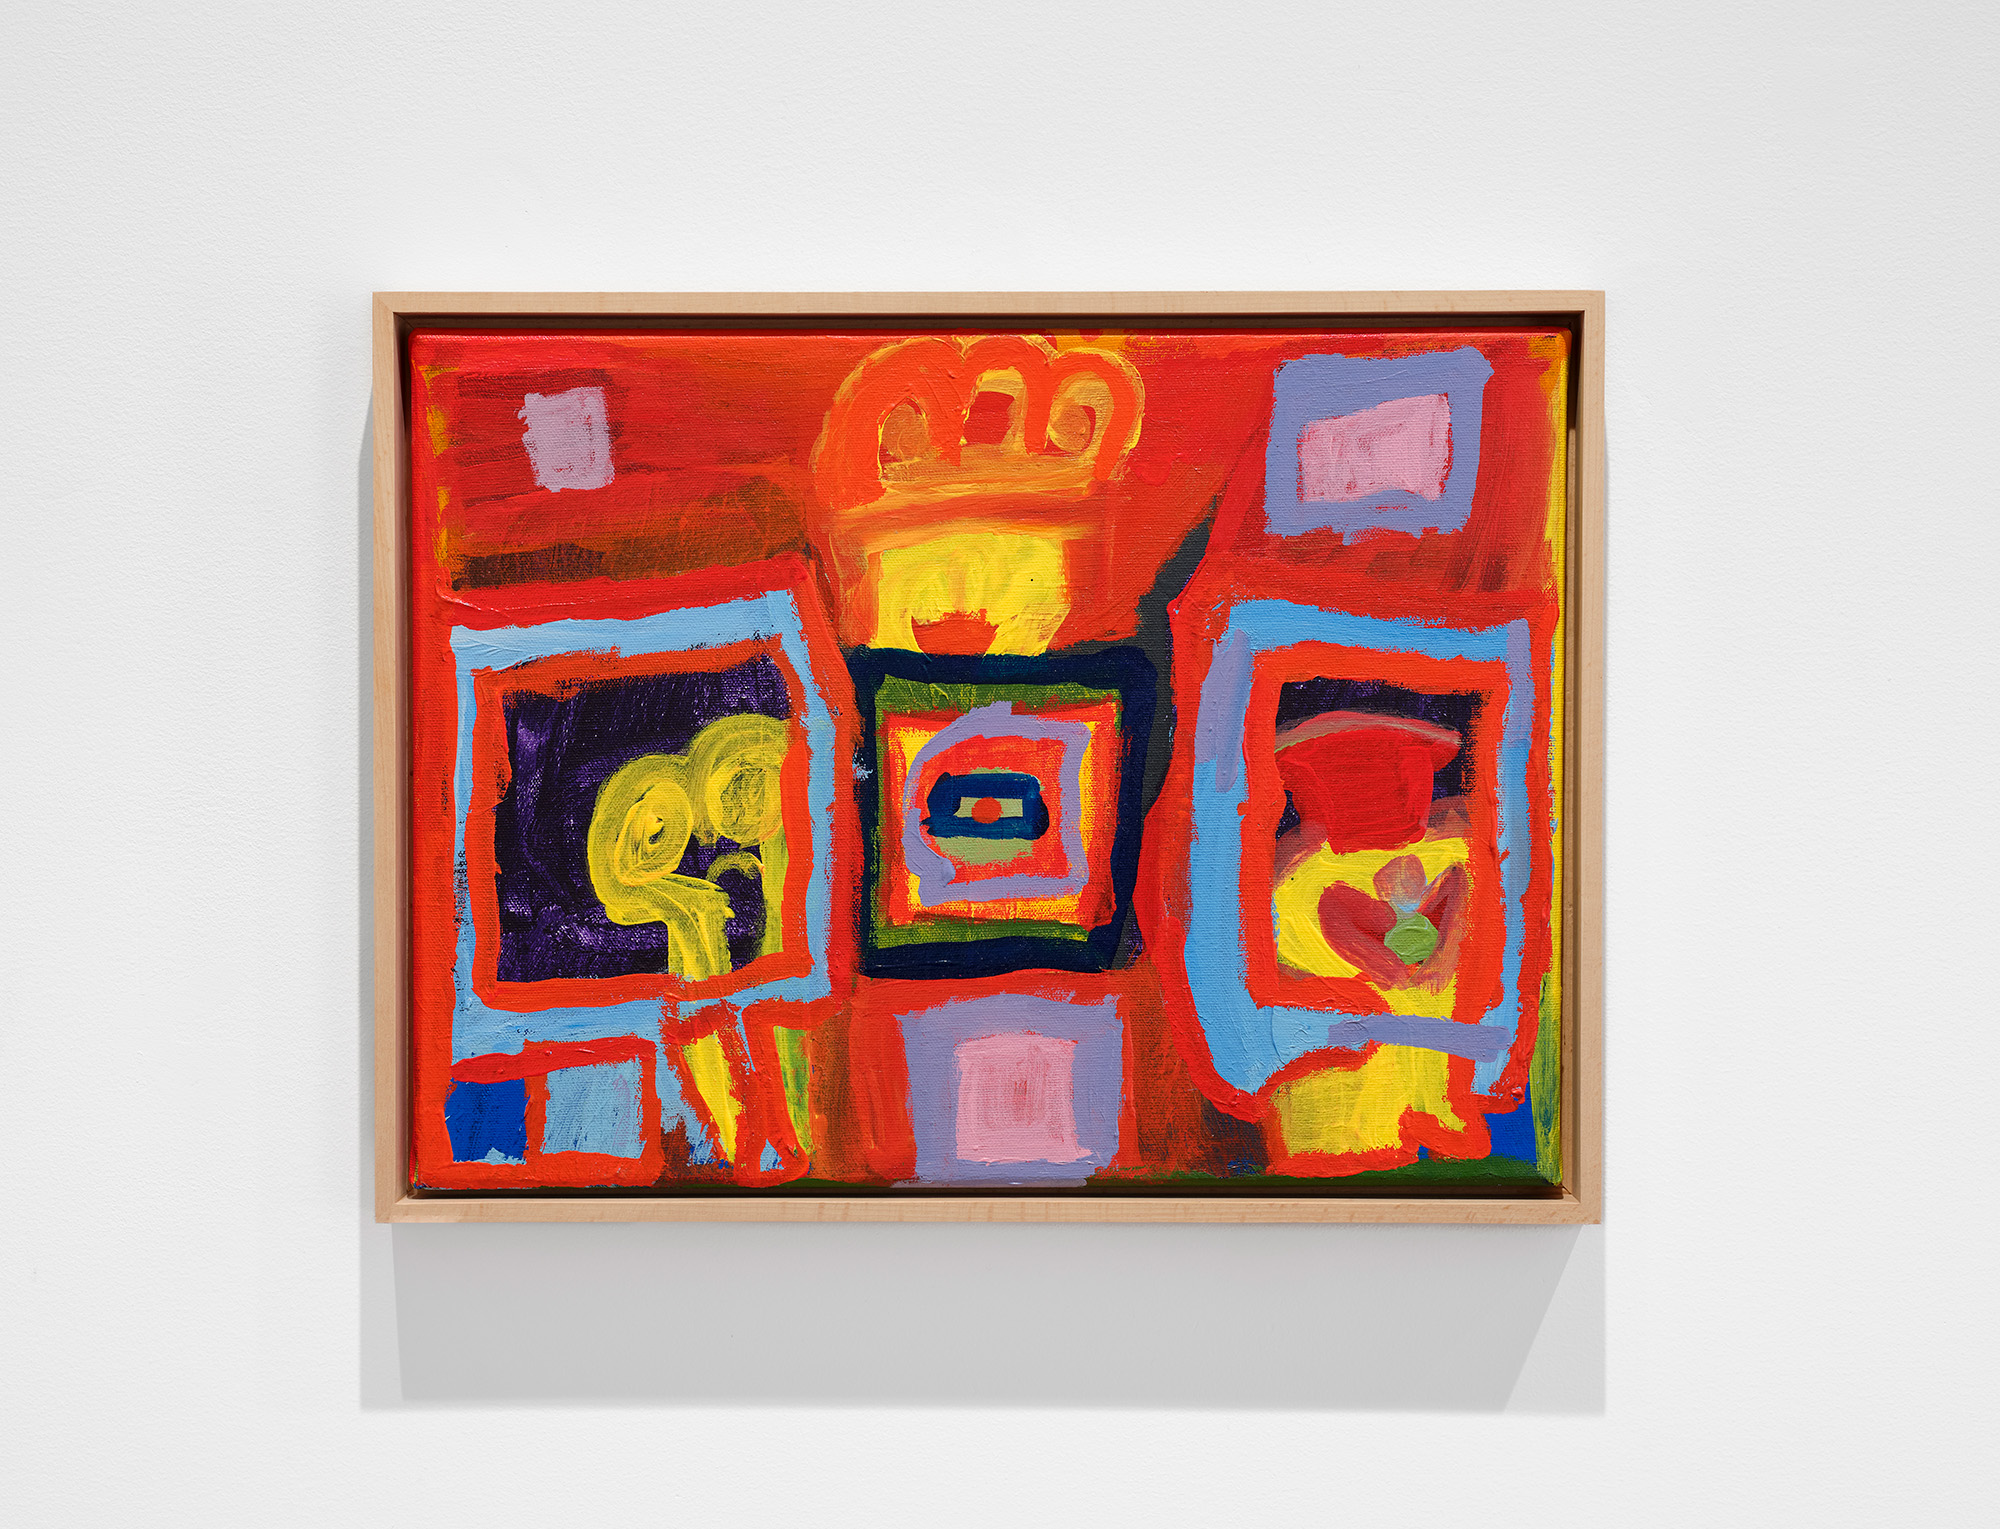 A vibrant red painting. The strokes are bold and colorblocked. An abstract image of a creature sits on the bottom right.